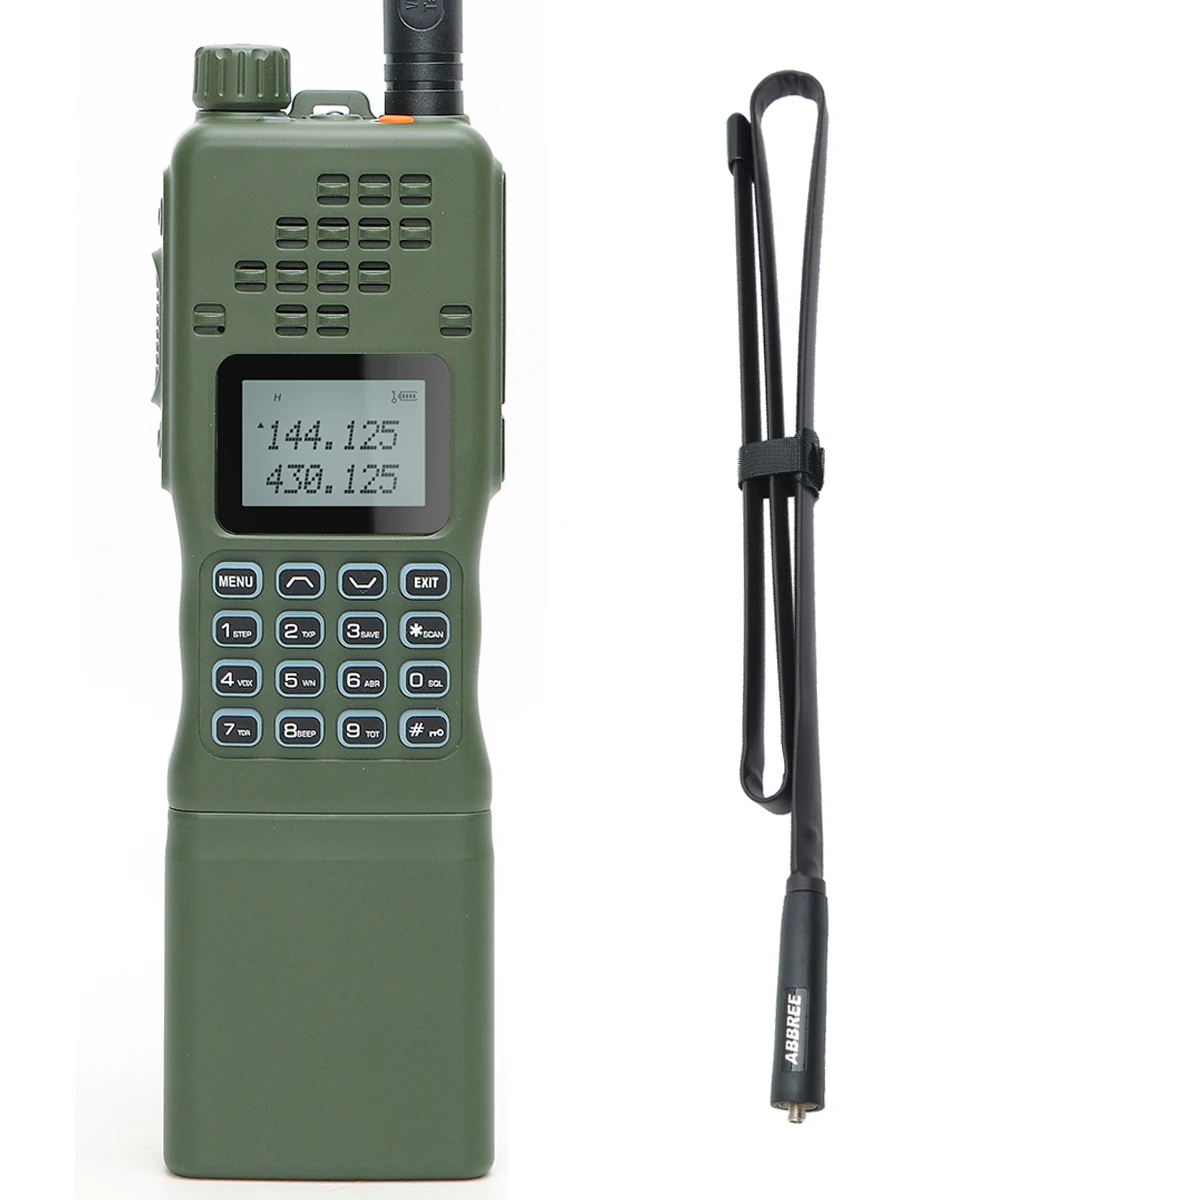 New Baofeng Ar-152 Powerful Walkie Talkie Dual Band Mbitr Tactical An  /prc-152 Two Way Radio With 108cm Tactical Antenna - Buy Baofeng Ar-152  Vhf/uhf 15w Powerful Walkie Talkie With 108cm Tactical Antenna,Dual